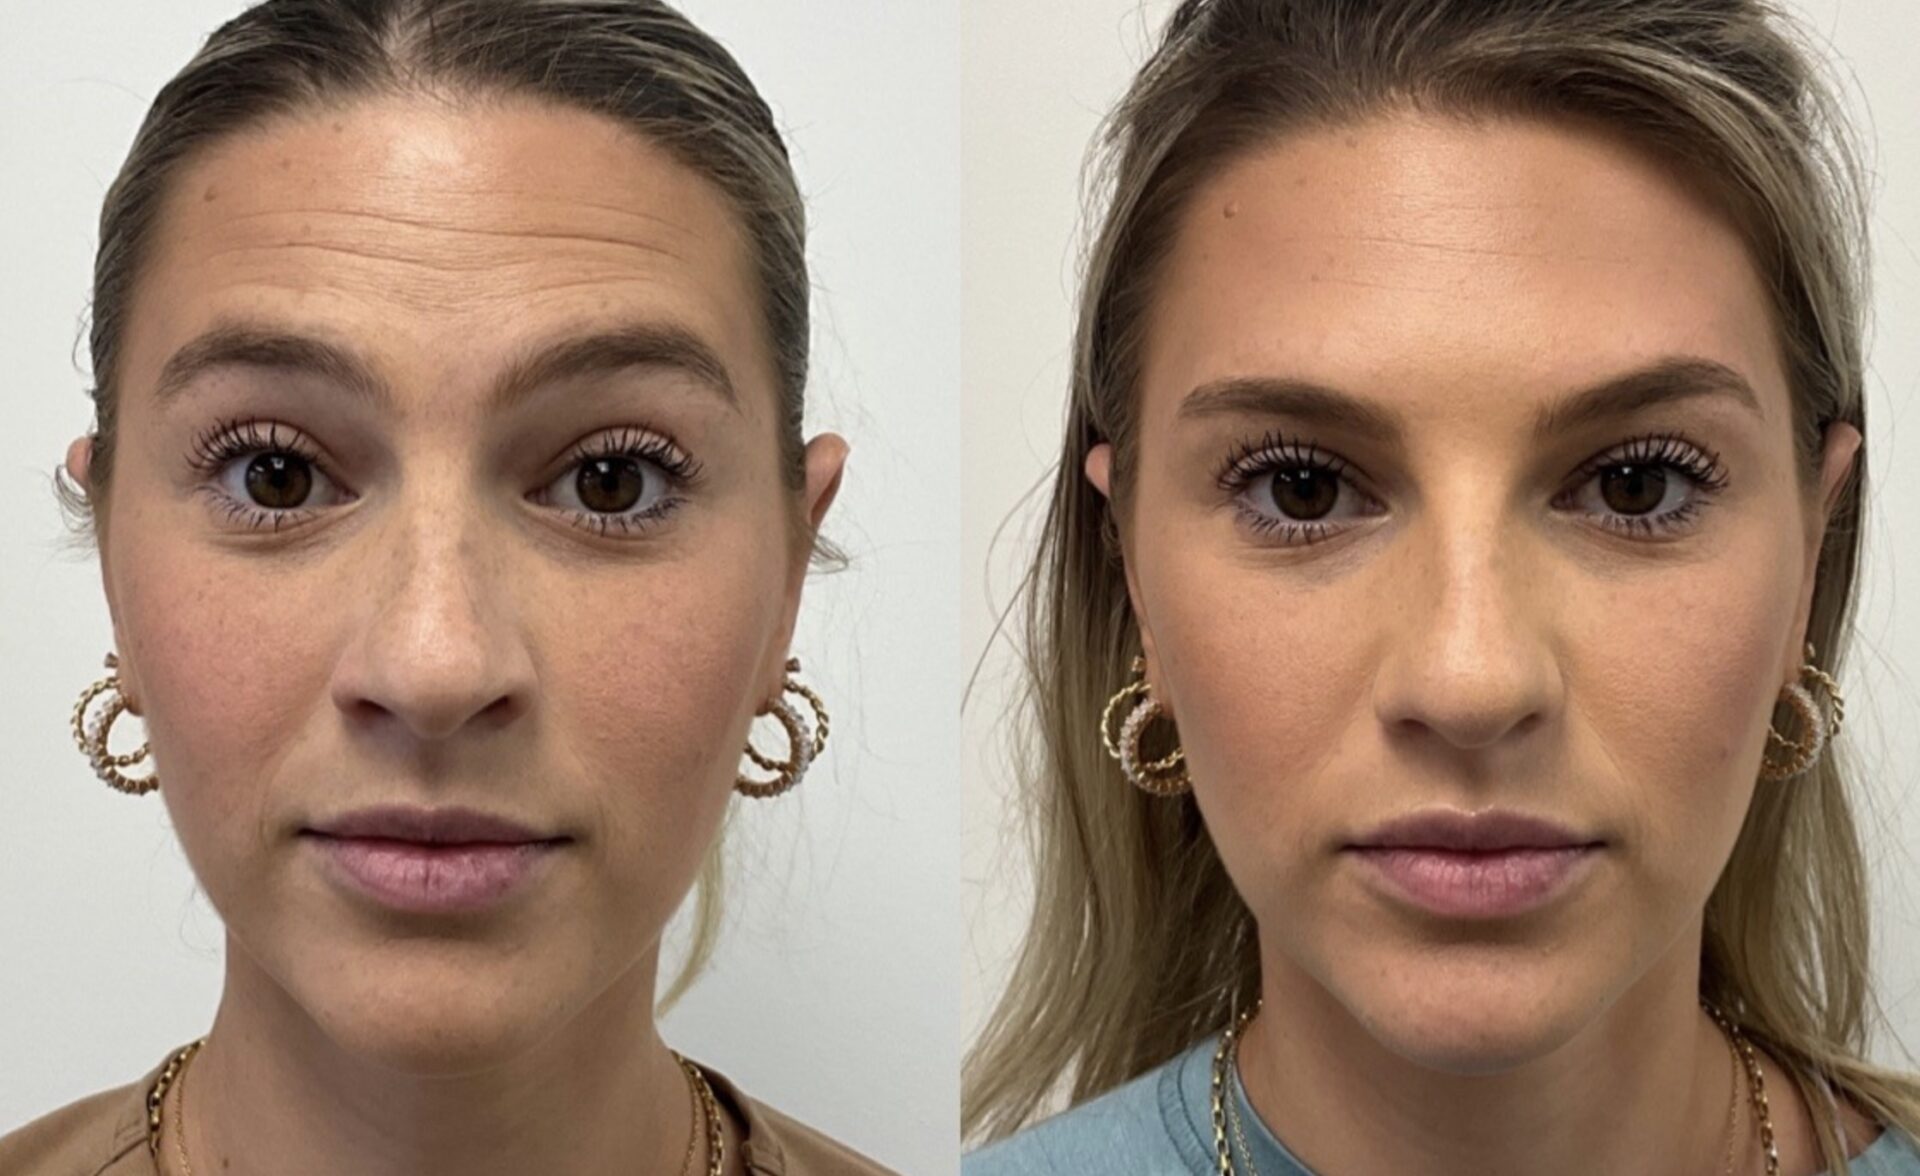 Effective botox treatment before and after | Medical Spa West Palm Beach, FL